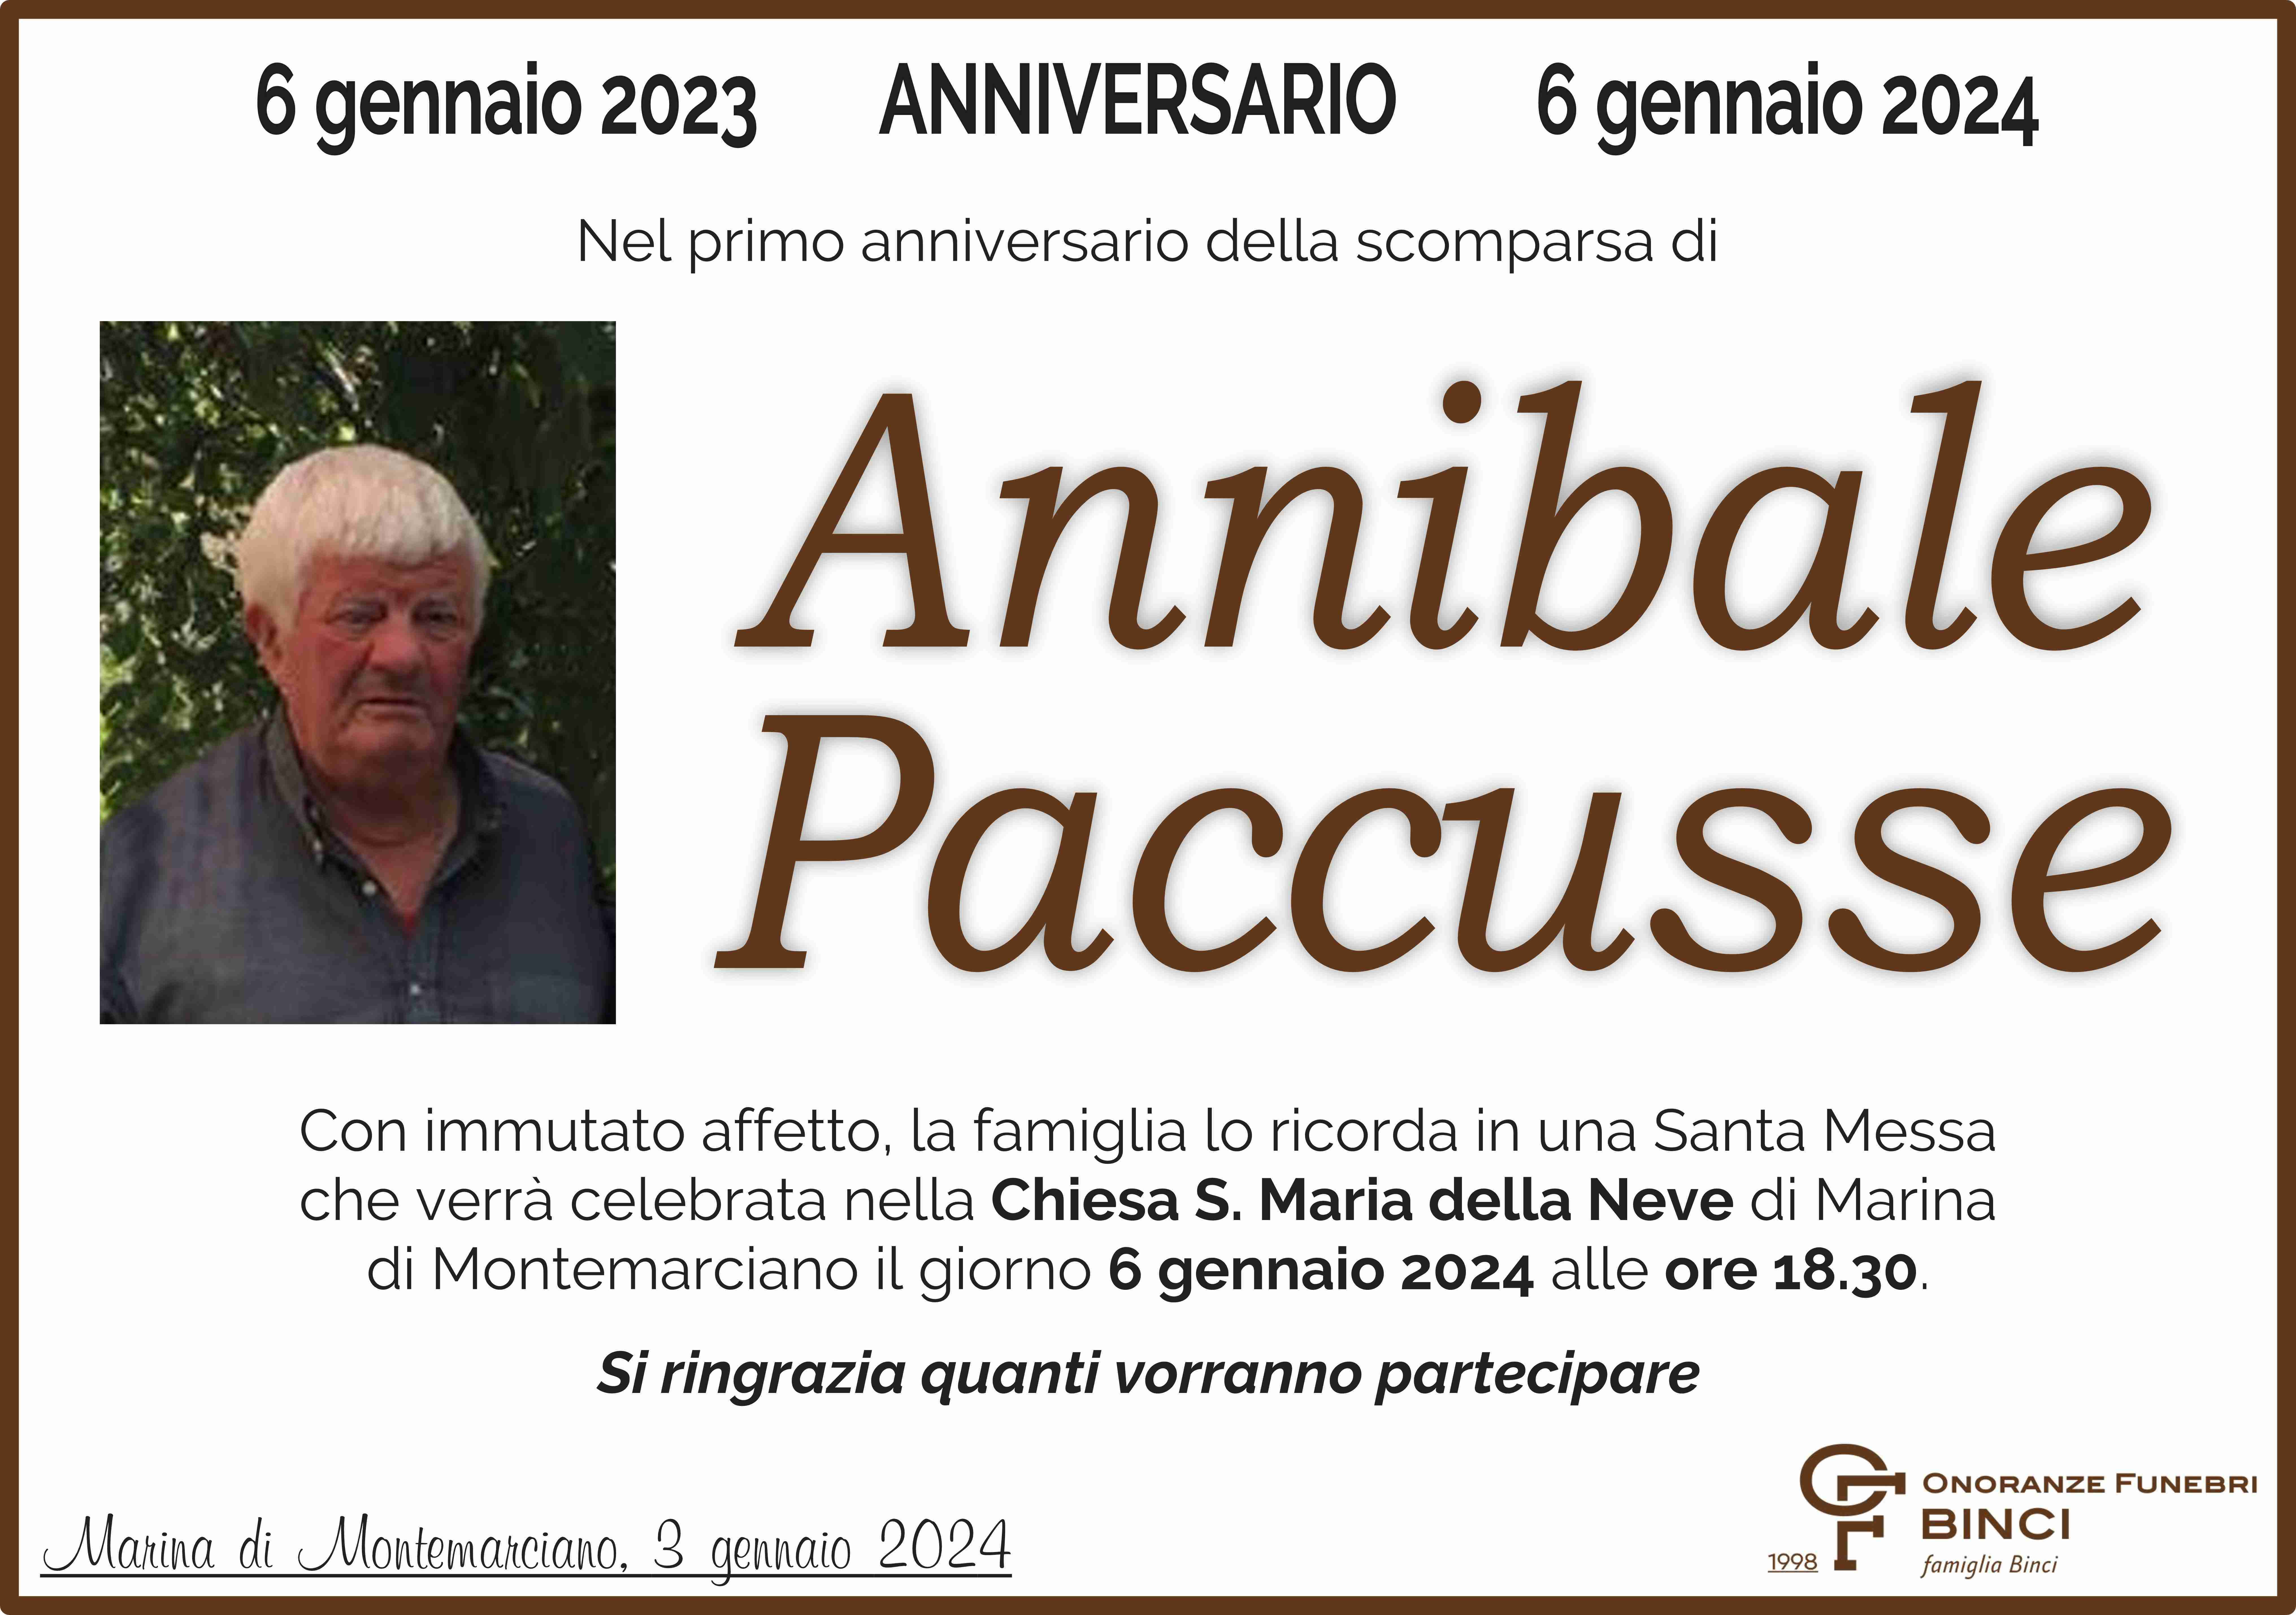 Annibale Paccusse